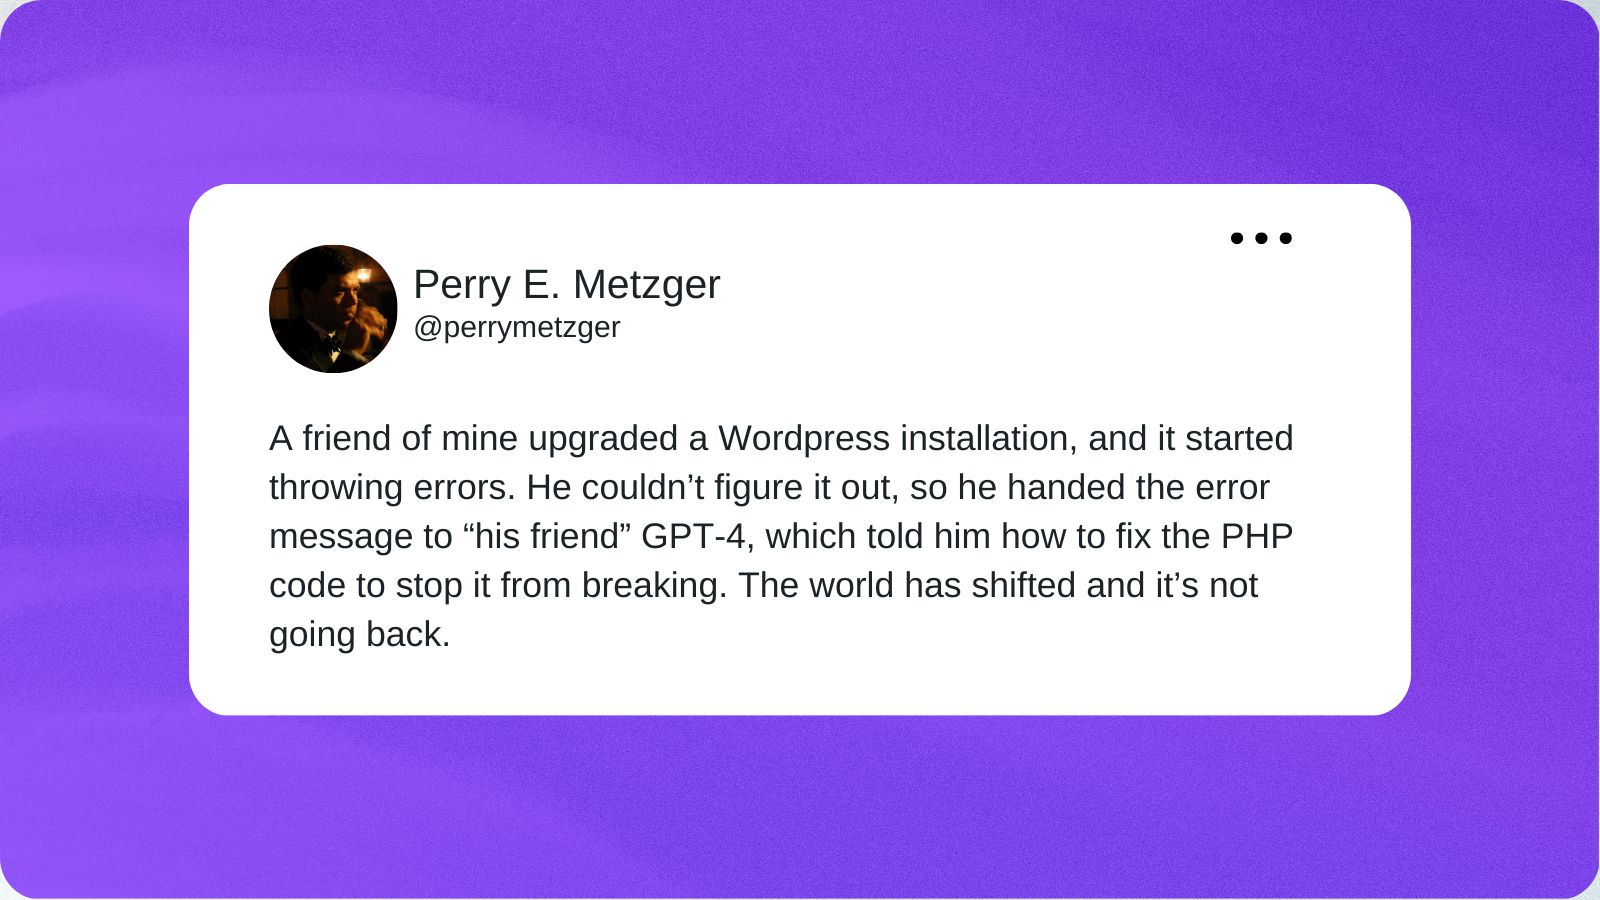 A tweet from Perry Metzger that reads “A friend of mine upgraded a Wordpress installation, and it started throwing errors. He couldn’t figure it out, so he handed the error message to “his friend” GPT-4, which told him how to fix the PHP code to stop it from breaking. The world has shifted and it’s not going back.”